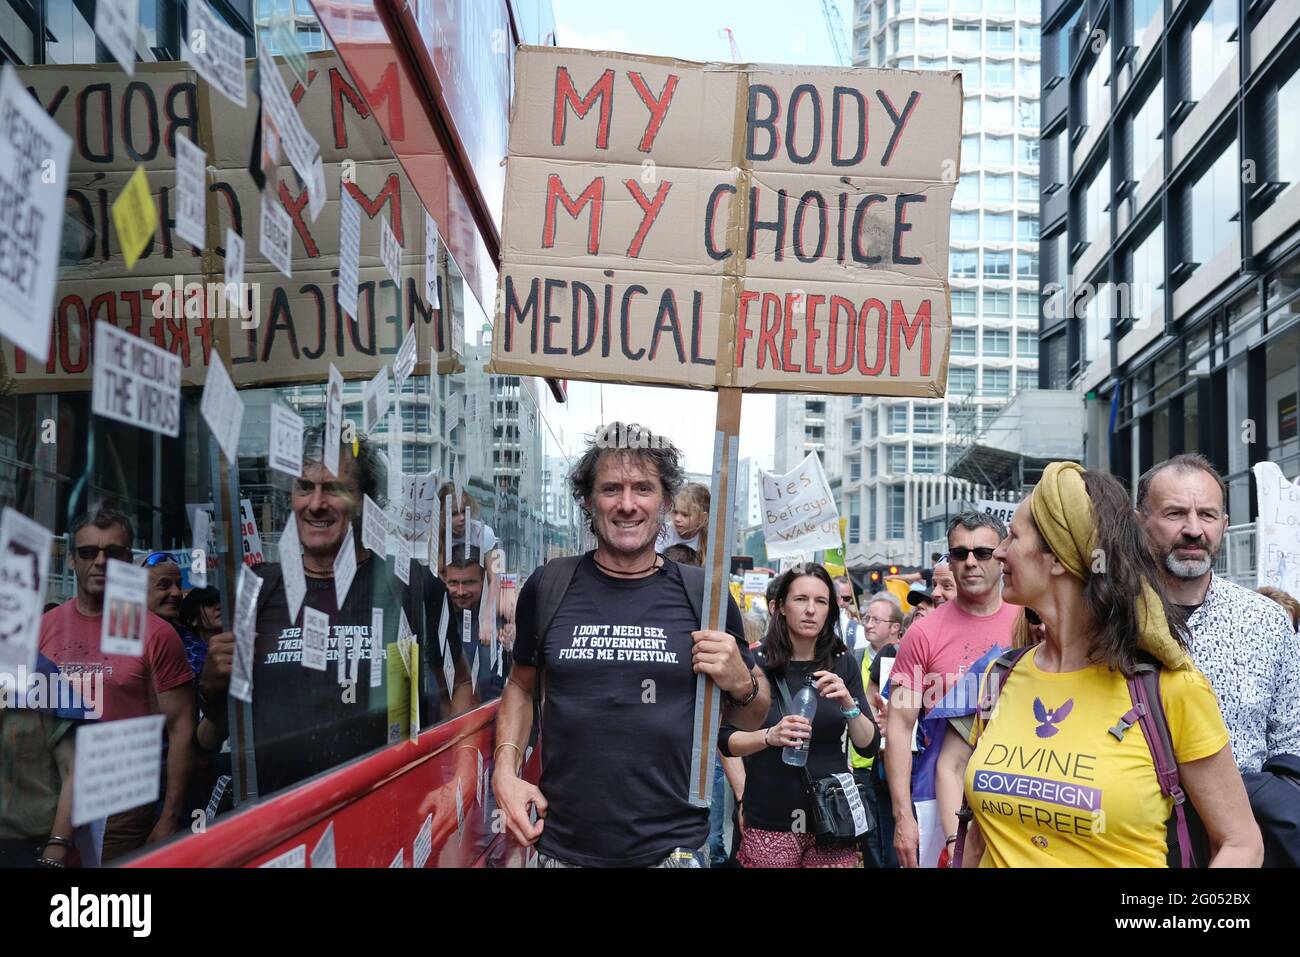 London, UK. A protest against Covid government restrictions takes place in central London where demonstrators demanded medical freedom of choice. Stock Photo